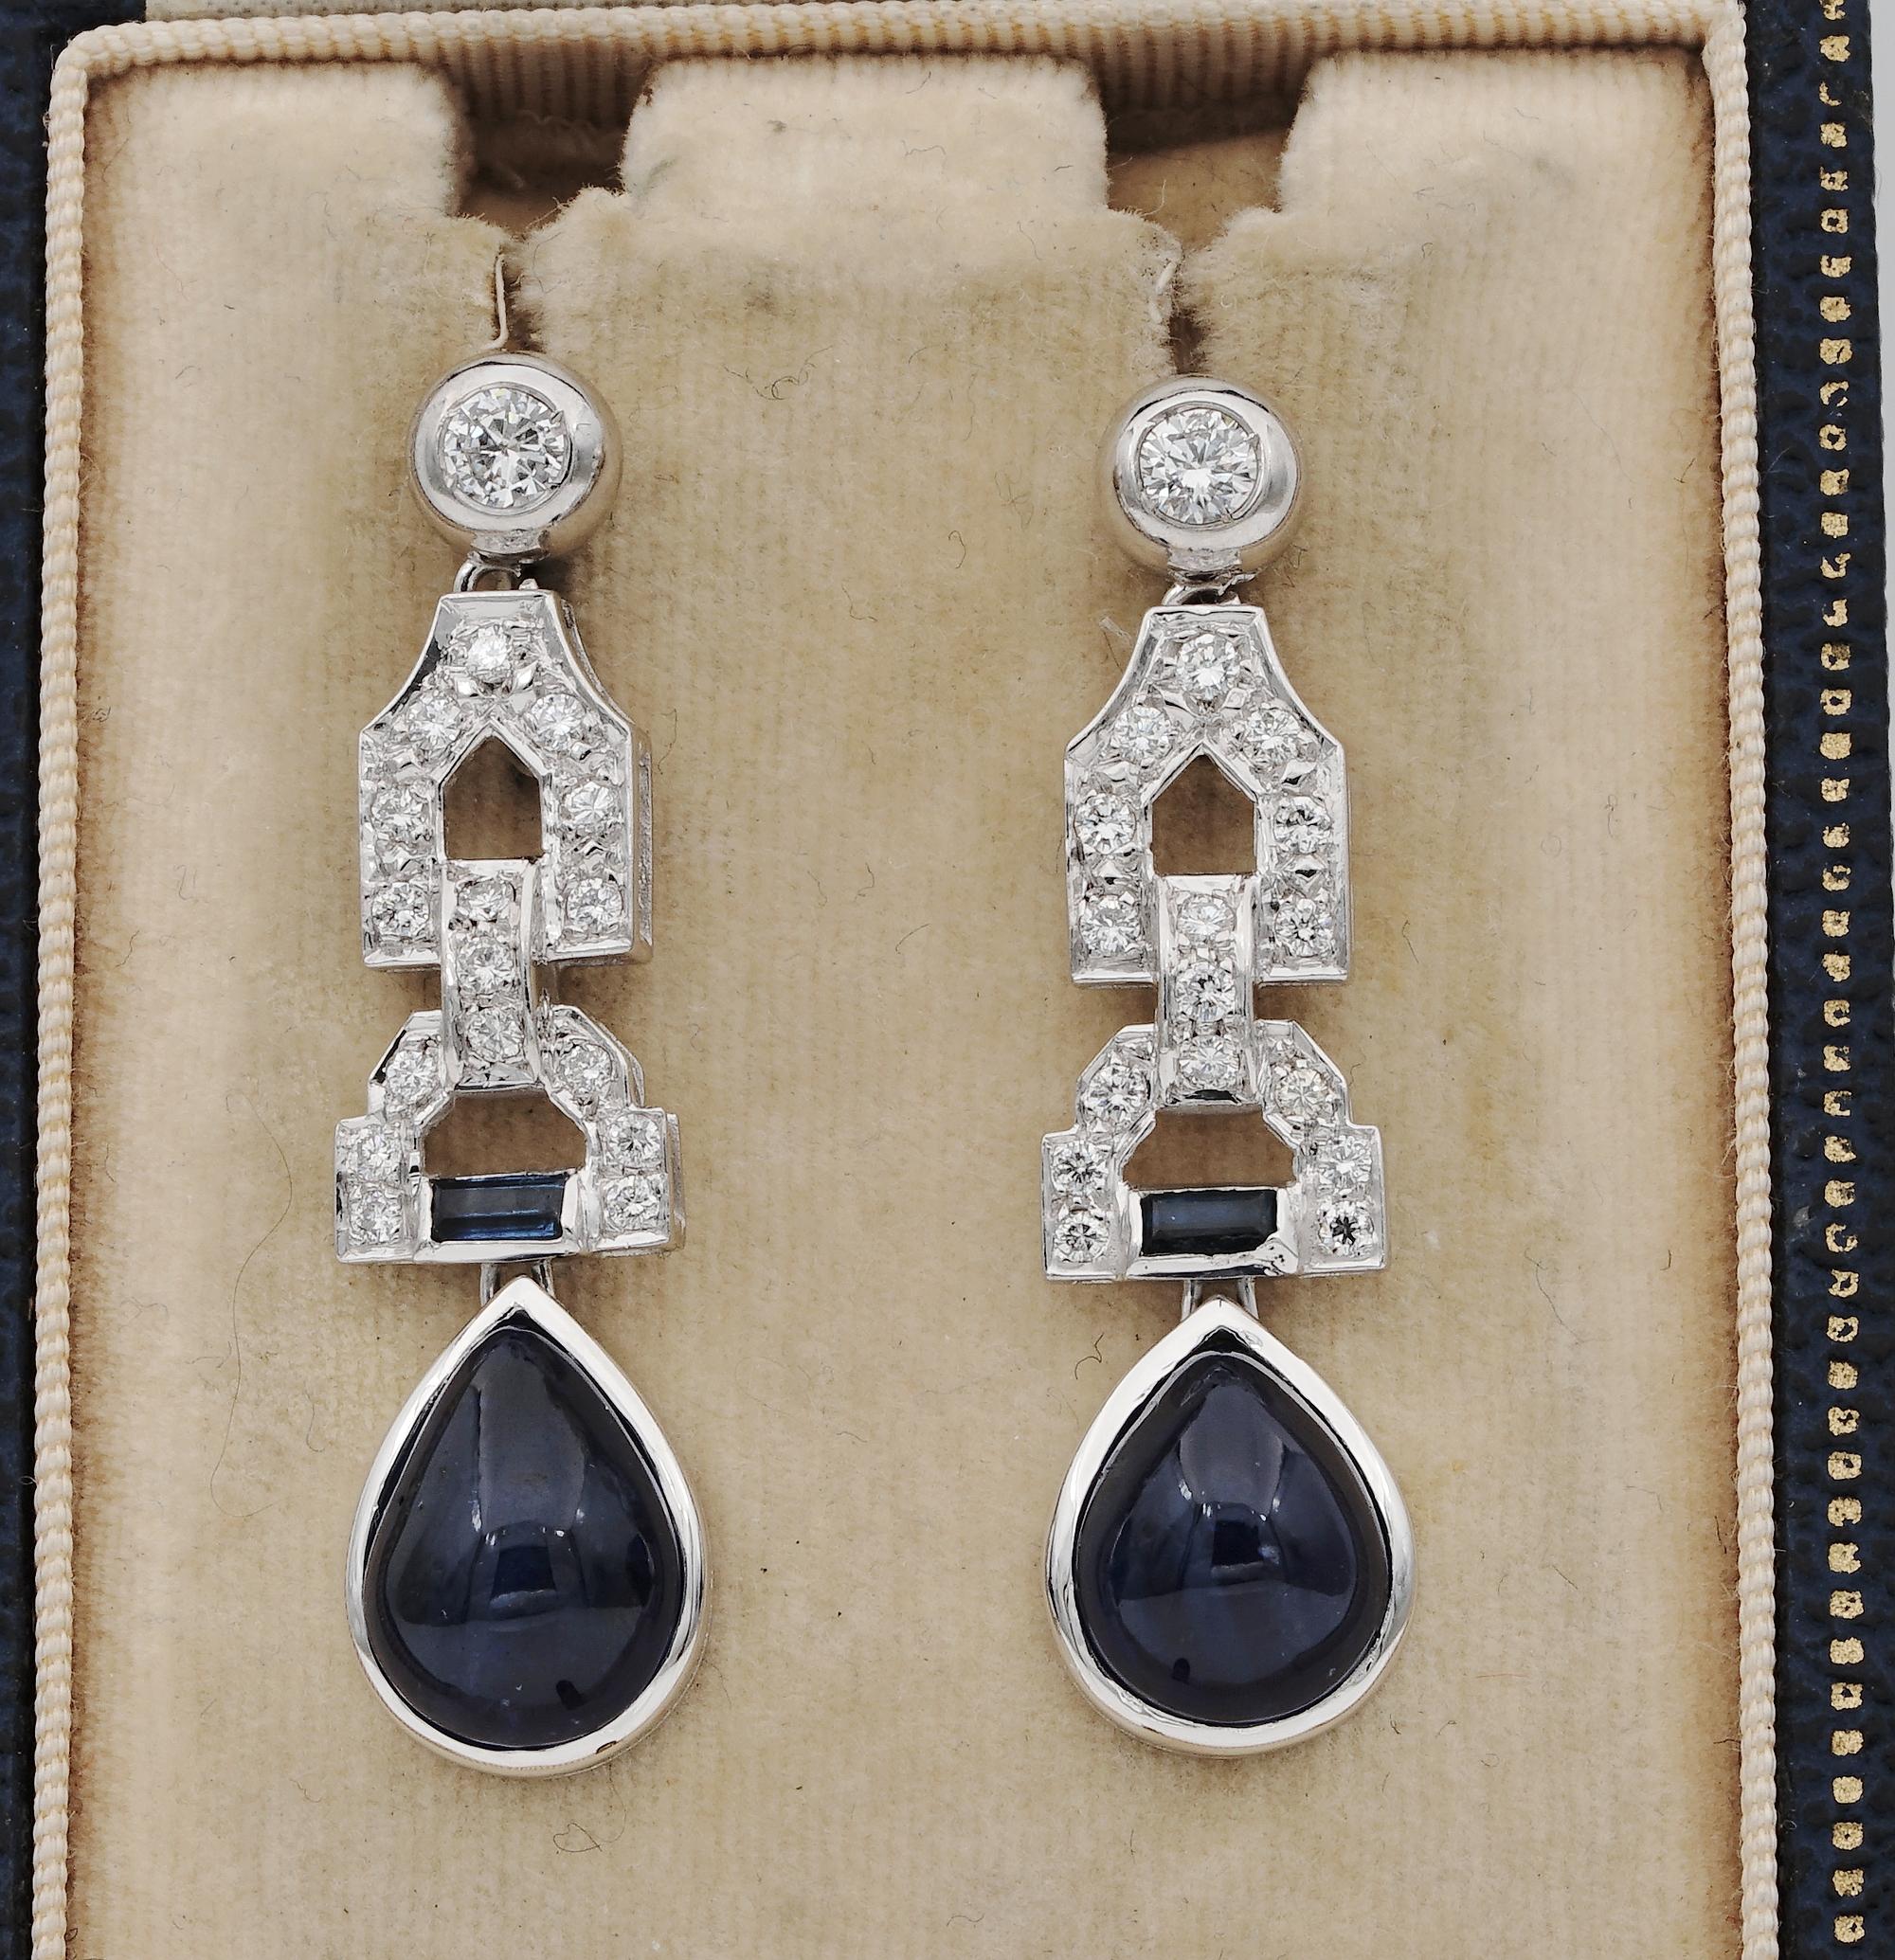 Elegance at Peak

These superbly designed late Art Deco Diamond and Sapphire earrings are for sure A MUST HAVE at any collection
Exquisitely hand crafted during the late Art Deco Period, of solid 14 Kt white gold - marked
The earrings prize